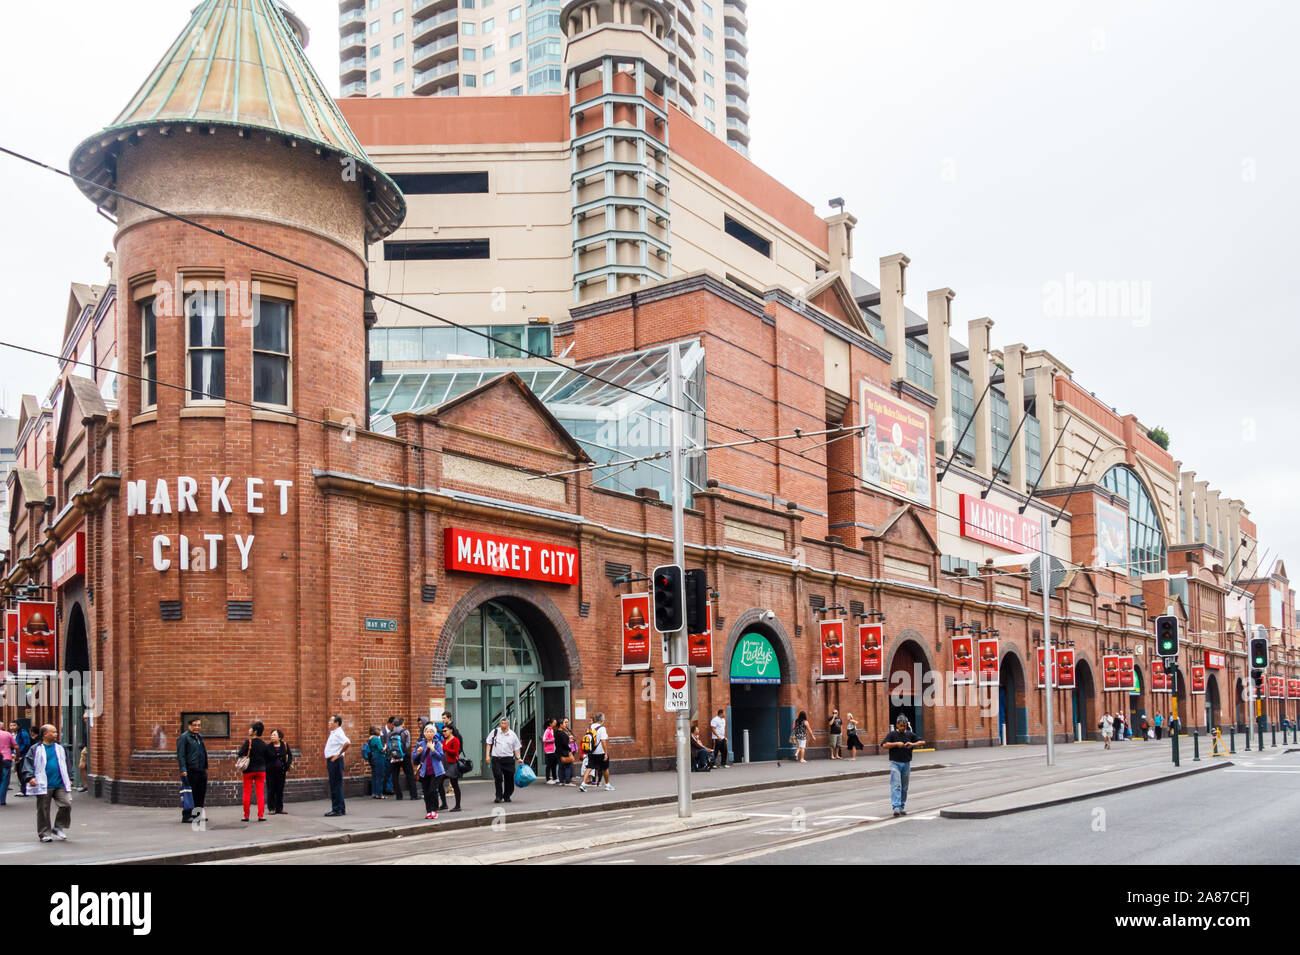 Sydney, Australia - March 15th 2013: Market City shopping complex in Chinatown. The centre is located in Haymarket. Stock Photo